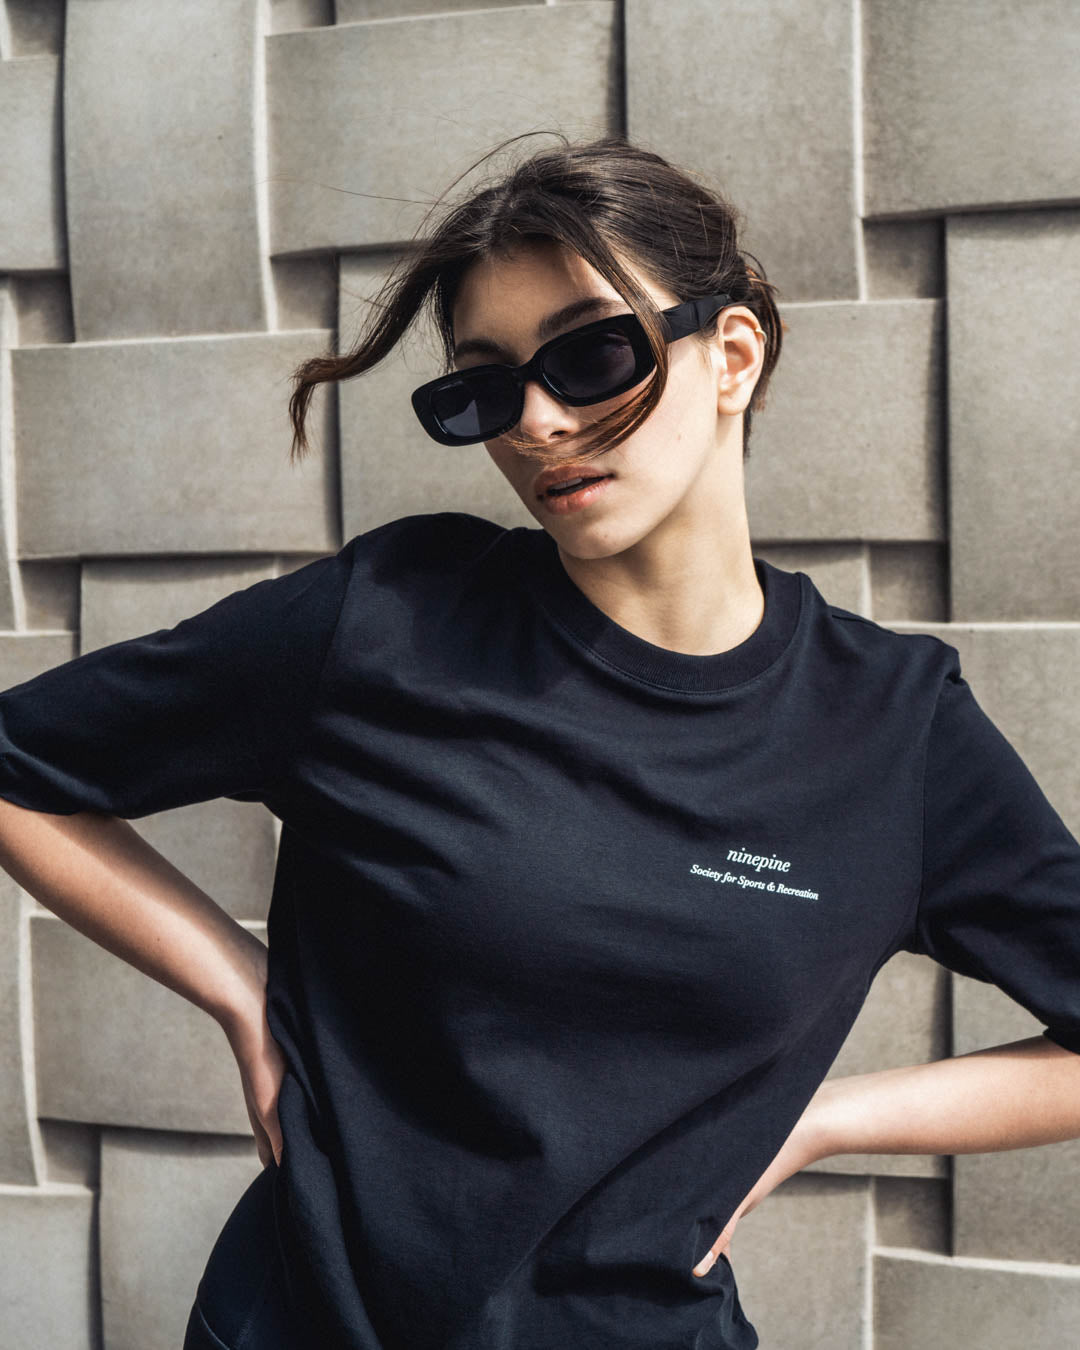 Woman posing in a ninepine black t-shirt with rectangular sunglasses